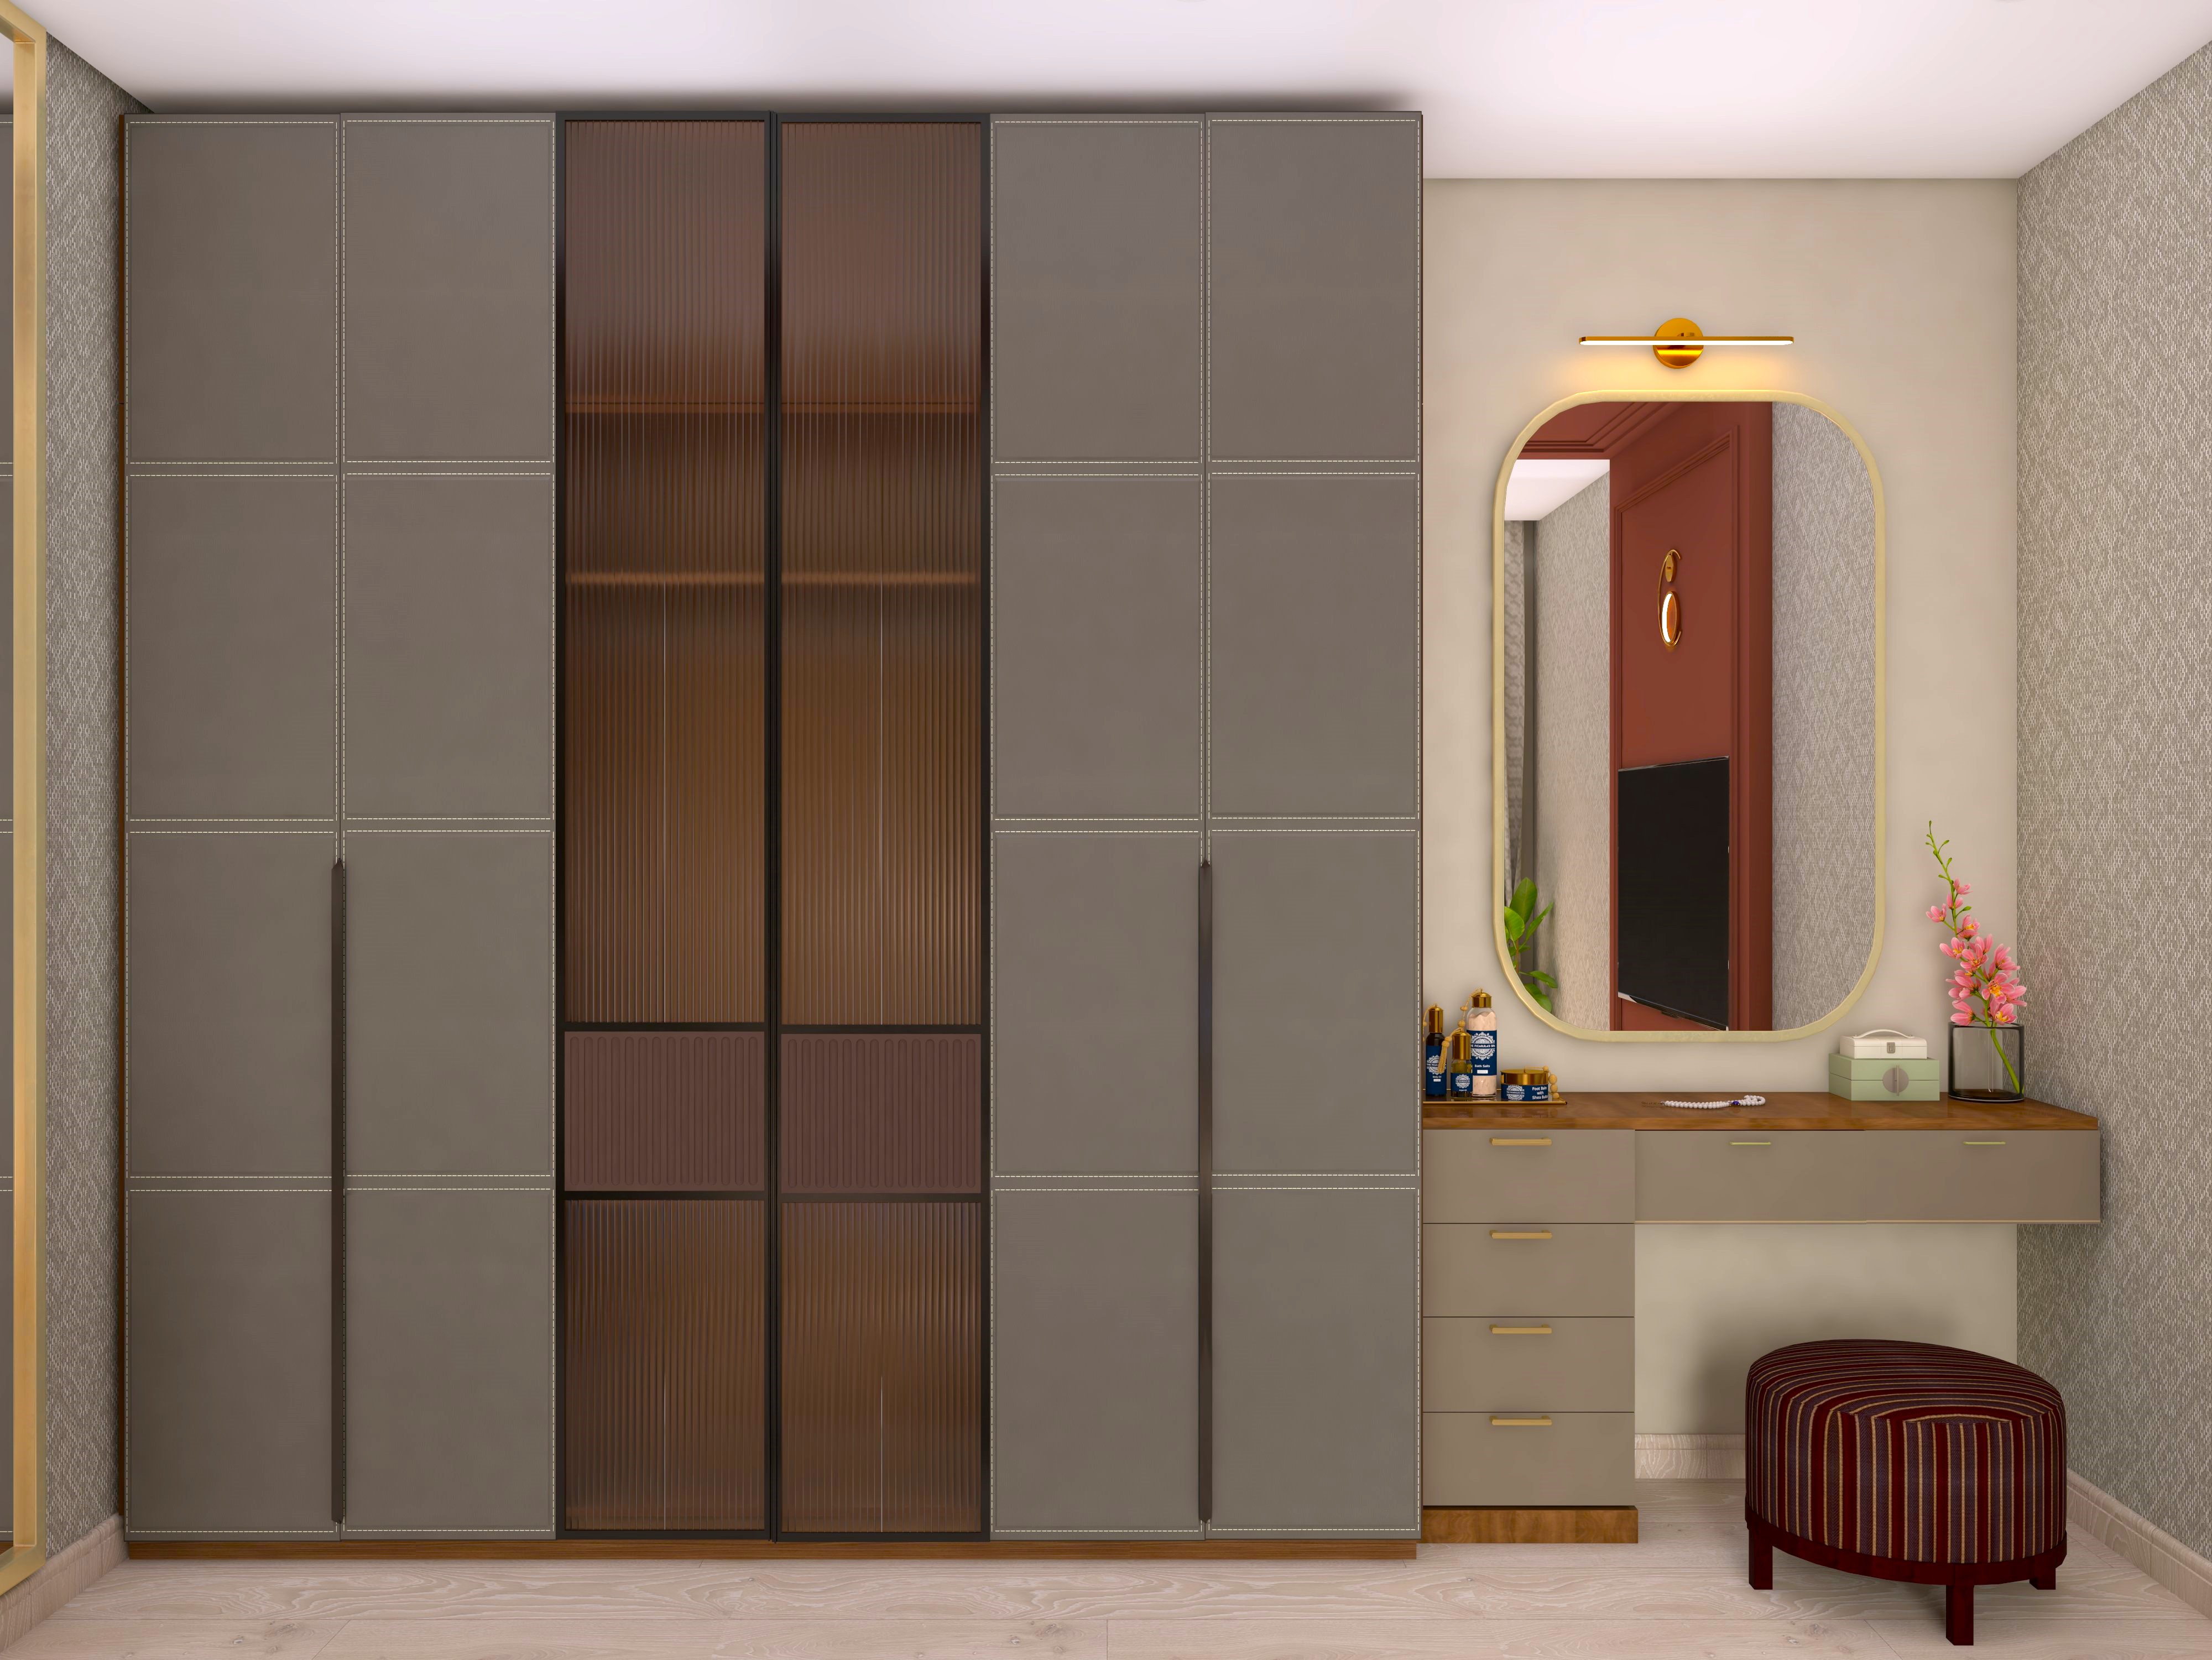 Master bedroom wardrobe with leather finish and dressing table - Beautiful Homes